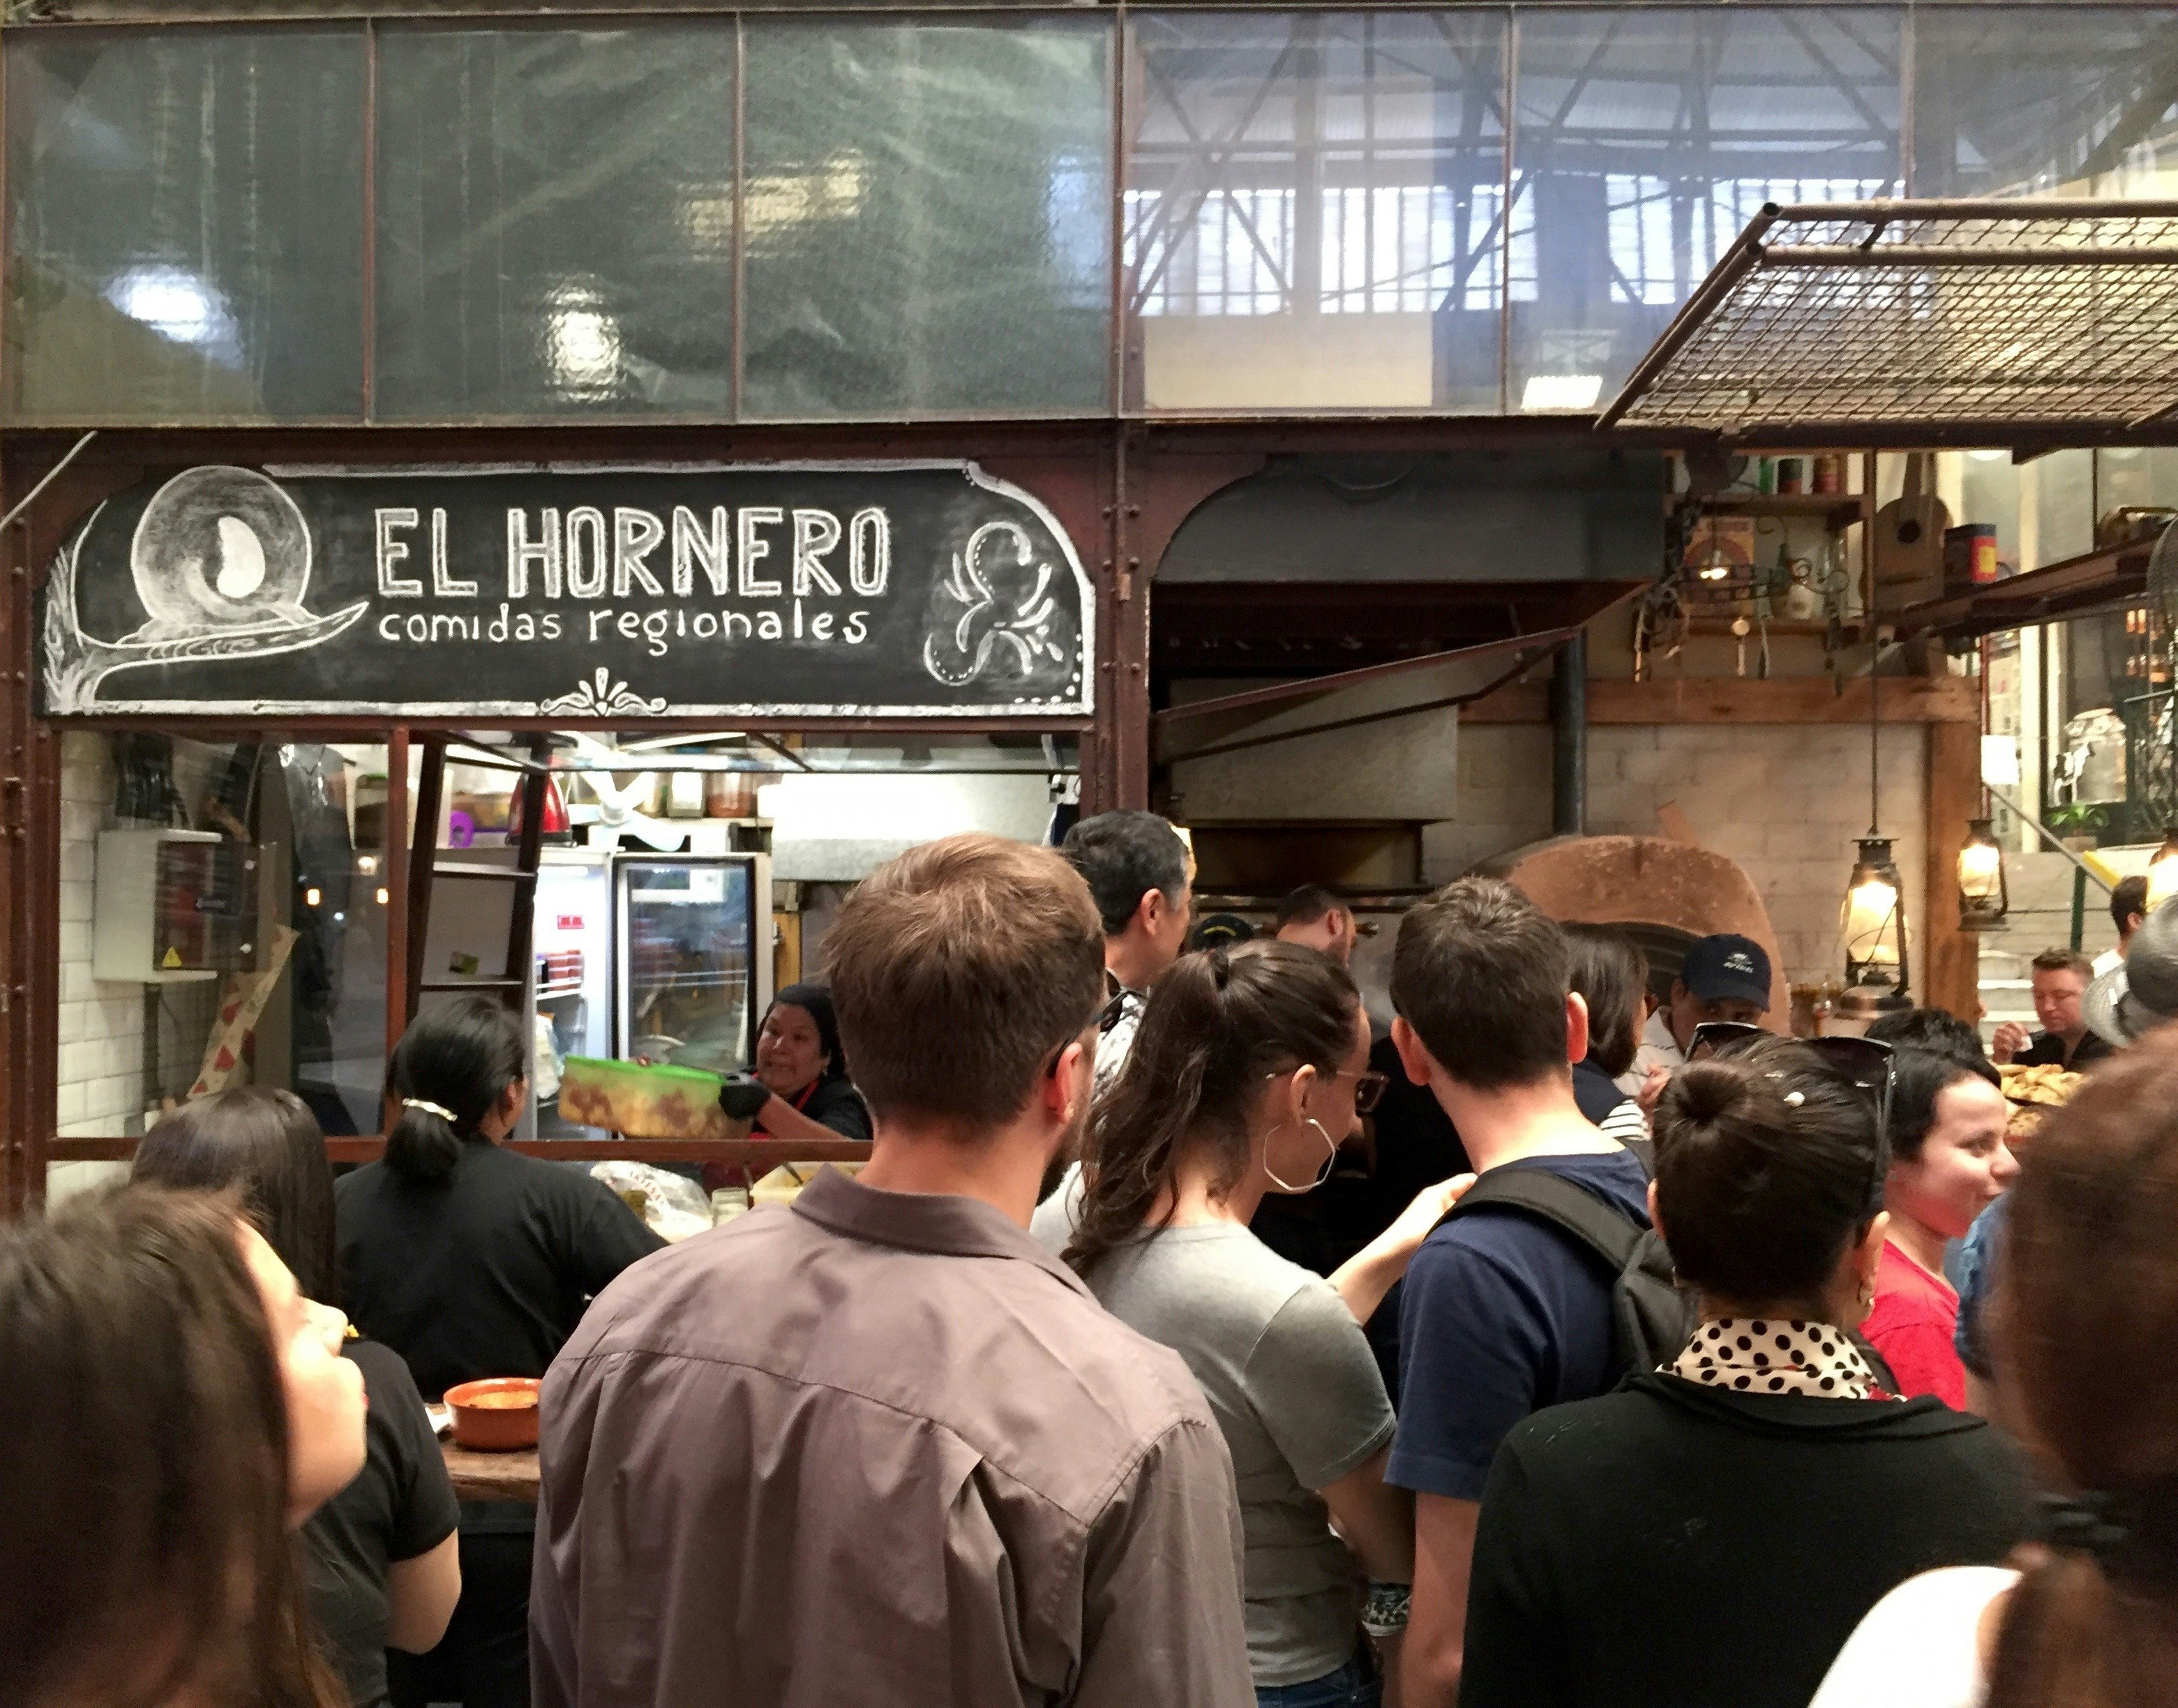 A crowd of people are lining up for empanadas at the El Hornero stall in a covered market. The stall's sign has been drawn on a chalkboard.